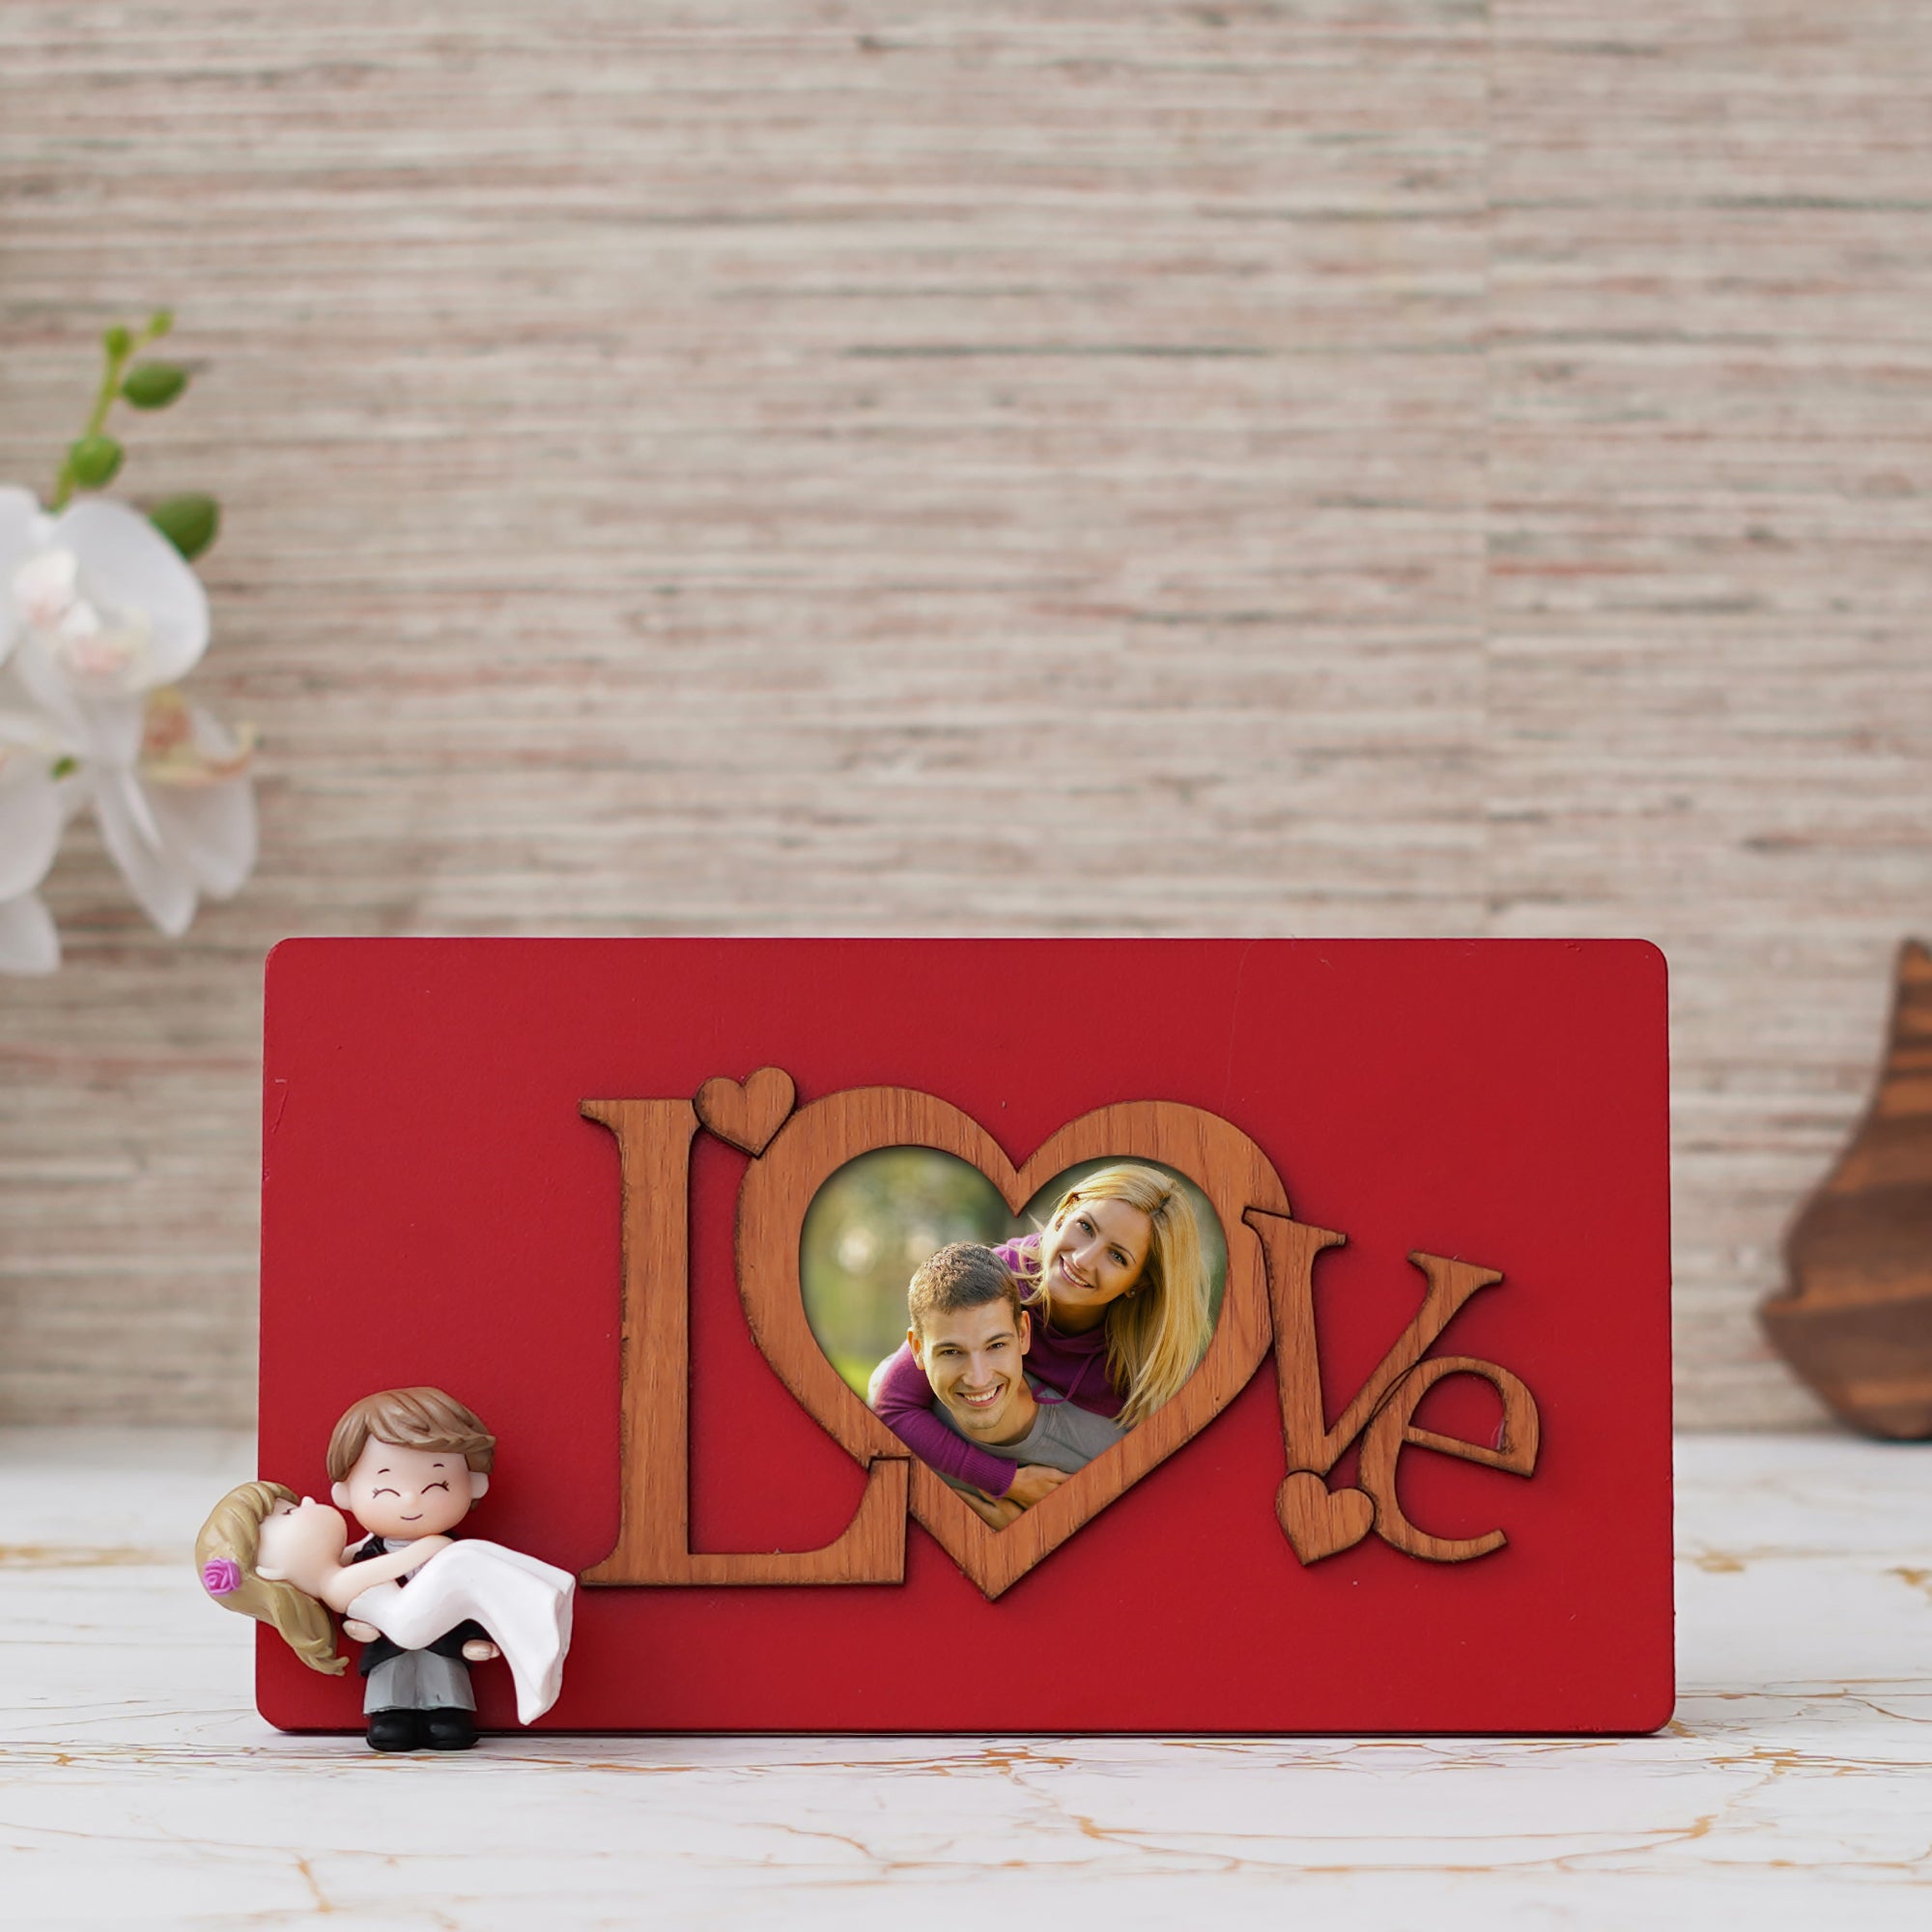 Valentine Combo of "Love" Wooden Photo Frame With Red Stand, Bride Kissing Groom Romantic Polyresin Decorative Showpiece